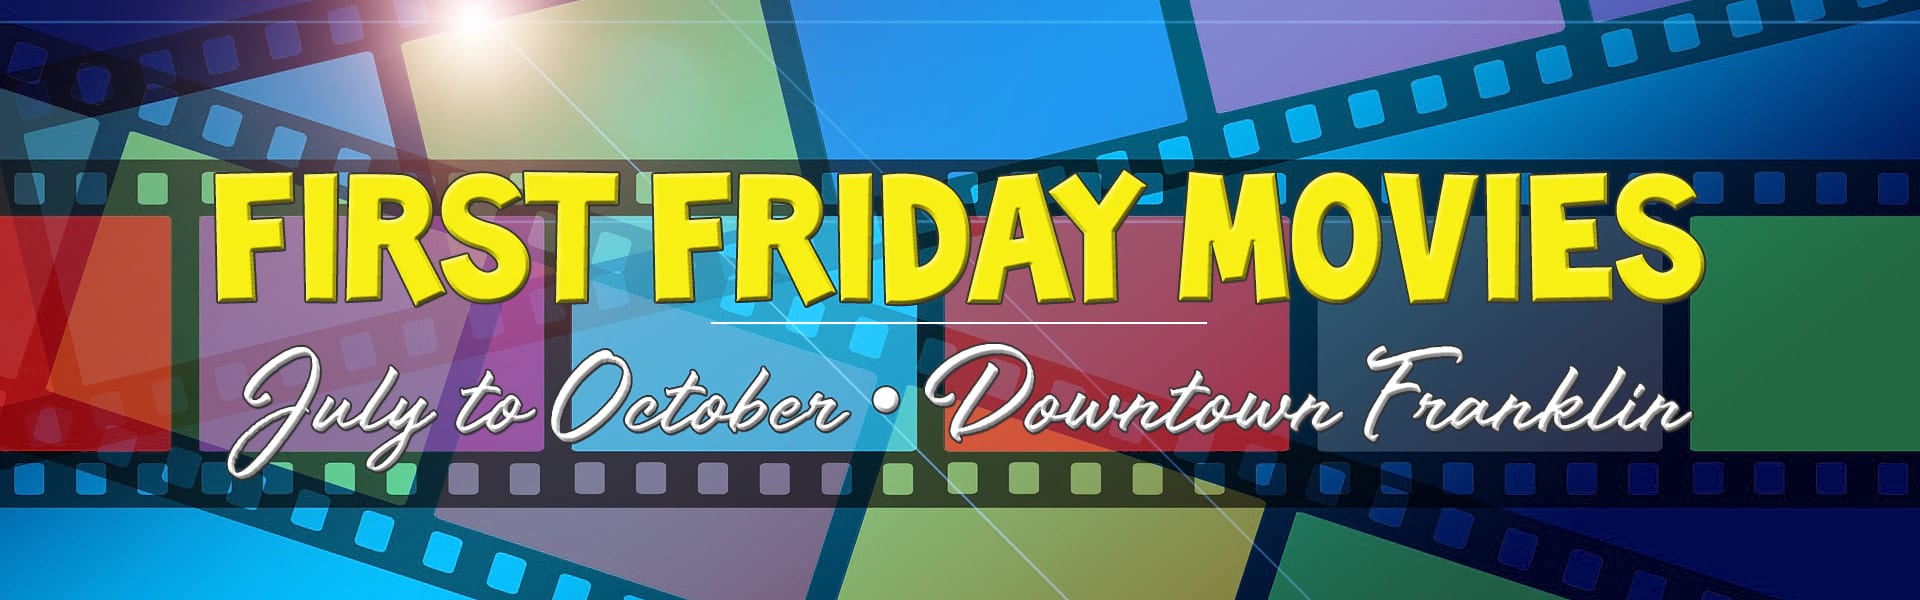 first friday movies downtown franklin nc